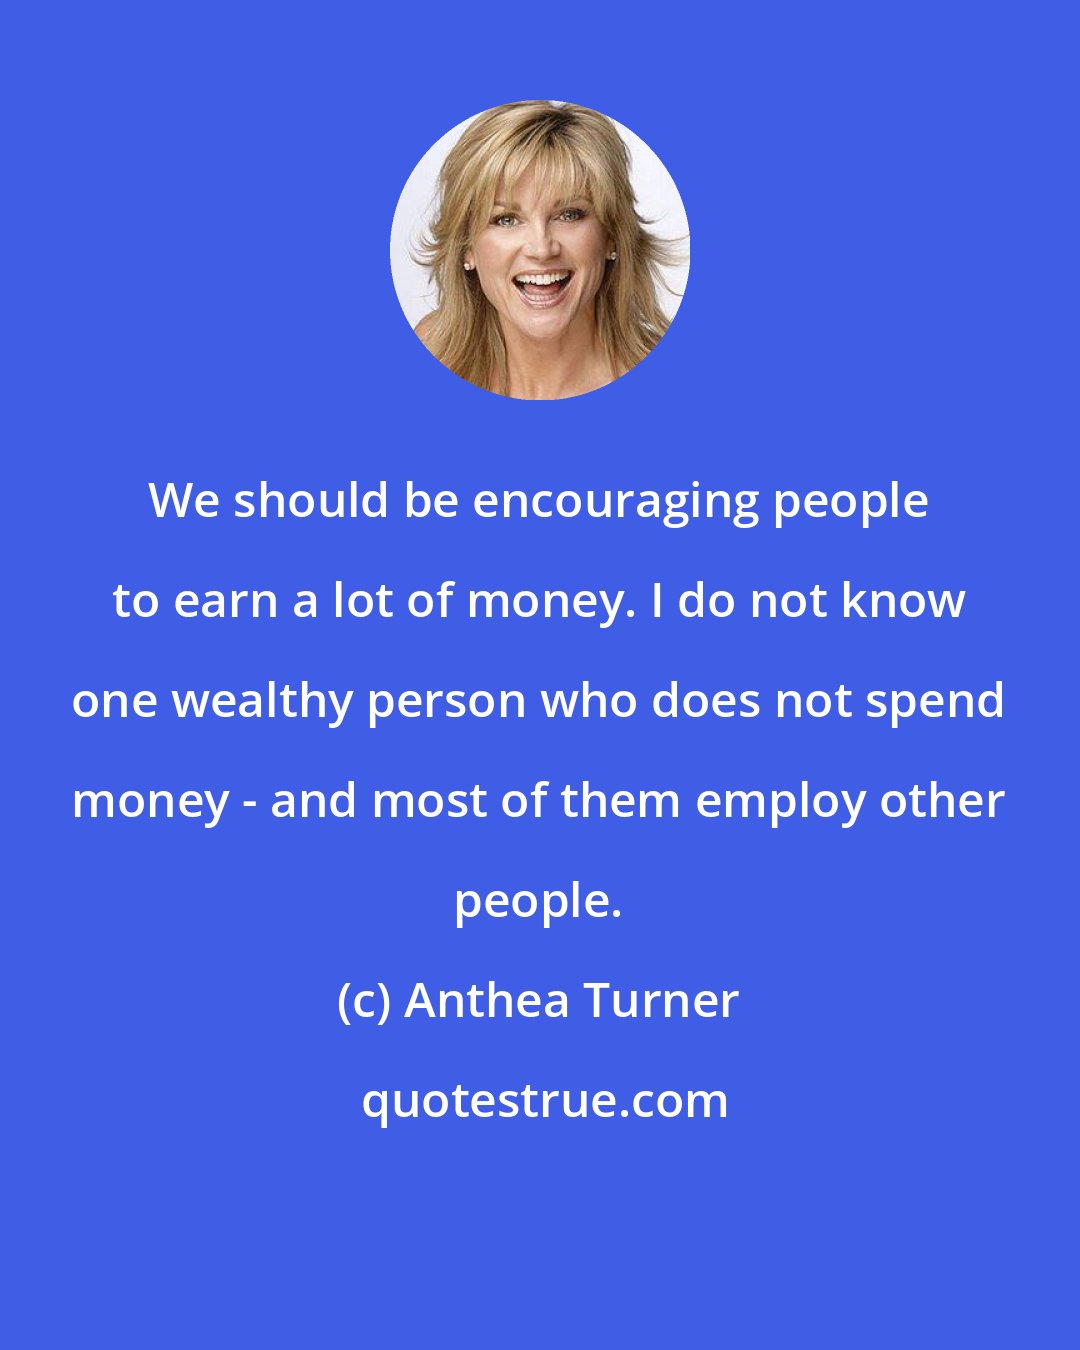 Anthea Turner: We should be encouraging people to earn a lot of money. I do not know one wealthy person who does not spend money - and most of them employ other people.